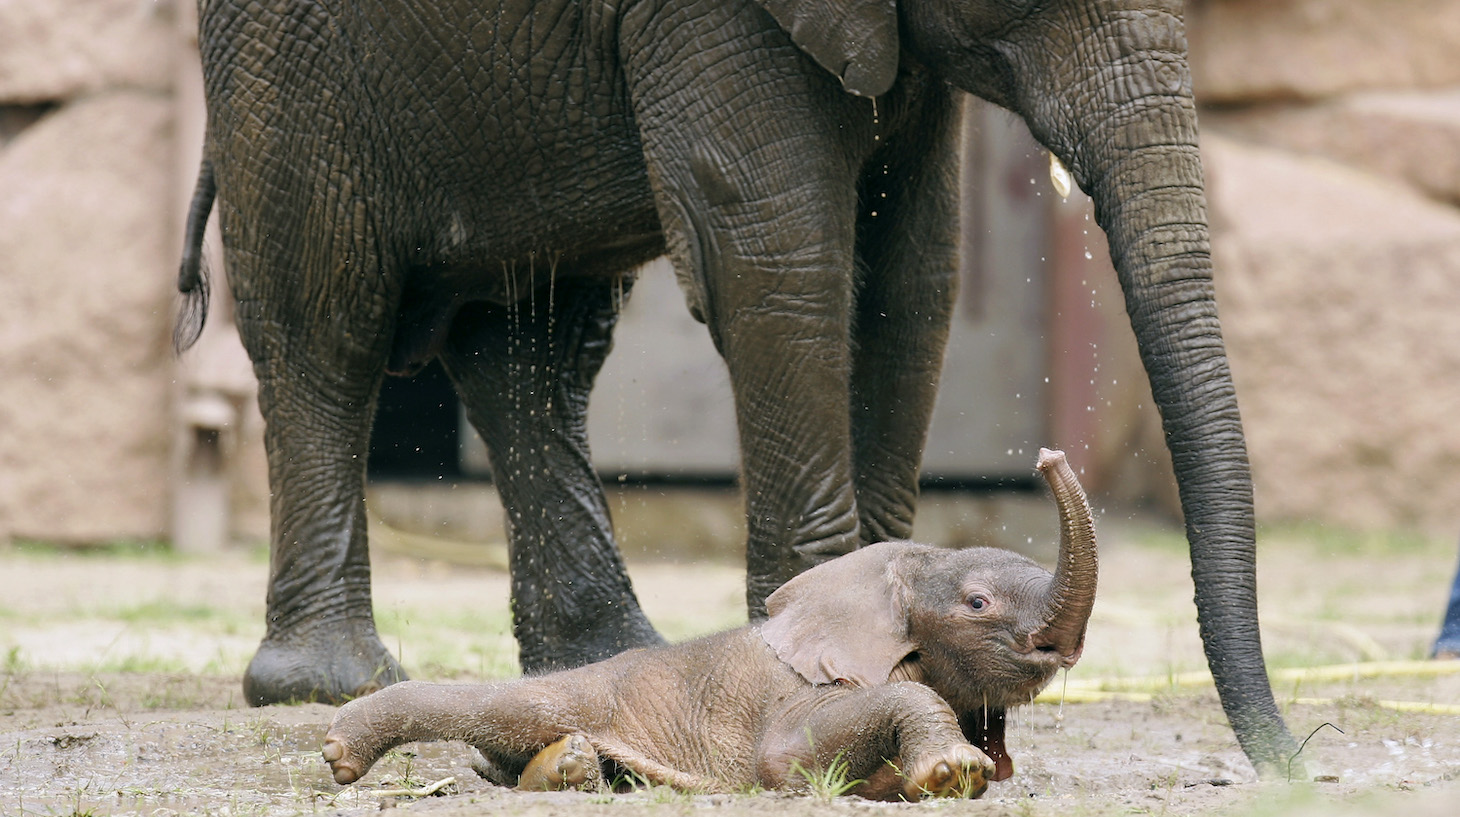 BERLIN - MAY 23: Three days old nameless elephant baby plays with his fellow "Tana" in his enclosure at the Zoological Garden (Tierpark) Berlin on May 23, 2007 in Berlin, Germany. The Zoological Garden presented today the new born elephant for the public. (Photo by Andreas Rentz/Getty Images)